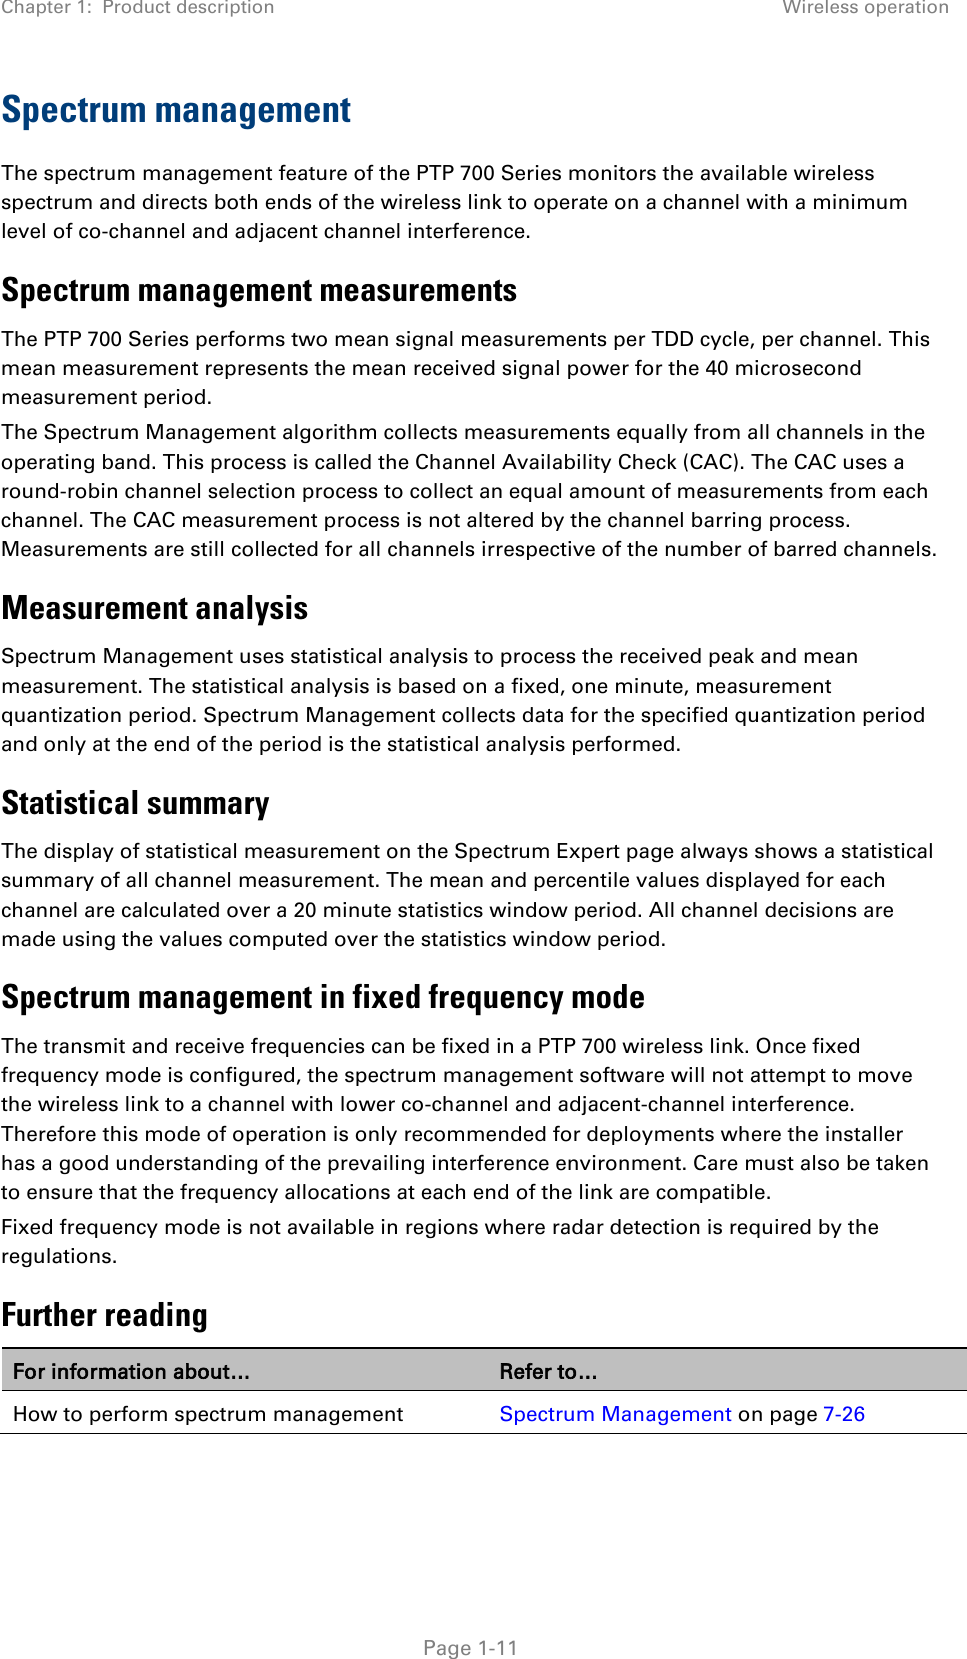 Chapter 1:  Product description Wireless operation  Spectrum management The spectrum management feature of the PTP 700 Series monitors the available wireless spectrum and directs both ends of the wireless link to operate on a channel with a minimum level of co-channel and adjacent channel interference. Spectrum management measurements The PTP 700 Series performs two mean signal measurements per TDD cycle, per channel. This mean measurement represents the mean received signal power for the 40 microsecond measurement period. The Spectrum Management algorithm collects measurements equally from all channels in the operating band. This process is called the Channel Availability Check (CAC). The CAC uses a round-robin channel selection process to collect an equal amount of measurements from each channel. The CAC measurement process is not altered by the channel barring process. Measurements are still collected for all channels irrespective of the number of barred channels. Measurement analysis Spectrum Management uses statistical analysis to process the received peak and mean measurement. The statistical analysis is based on a fixed, one minute, measurement quantization period. Spectrum Management collects data for the specified quantization period and only at the end of the period is the statistical analysis performed. Statistical summary The display of statistical measurement on the Spectrum Expert page always shows a statistical summary of all channel measurement. The mean and percentile values displayed for each channel are calculated over a 20 minute statistics window period. All channel decisions are made using the values computed over the statistics window period. Spectrum management in fixed frequency mode The transmit and receive frequencies can be fixed in a PTP 700 wireless link. Once fixed frequency mode is configured, the spectrum management software will not attempt to move the wireless link to a channel with lower co-channel and adjacent-channel interference. Therefore this mode of operation is only recommended for deployments where the installer has a good understanding of the prevailing interference environment. Care must also be taken to ensure that the frequency allocations at each end of the link are compatible.  Fixed frequency mode is not available in regions where radar detection is required by the regulations.  Further reading For information about… Refer to… How to perform spectrum management Spectrum Management on page 7-26   Page 1-11 